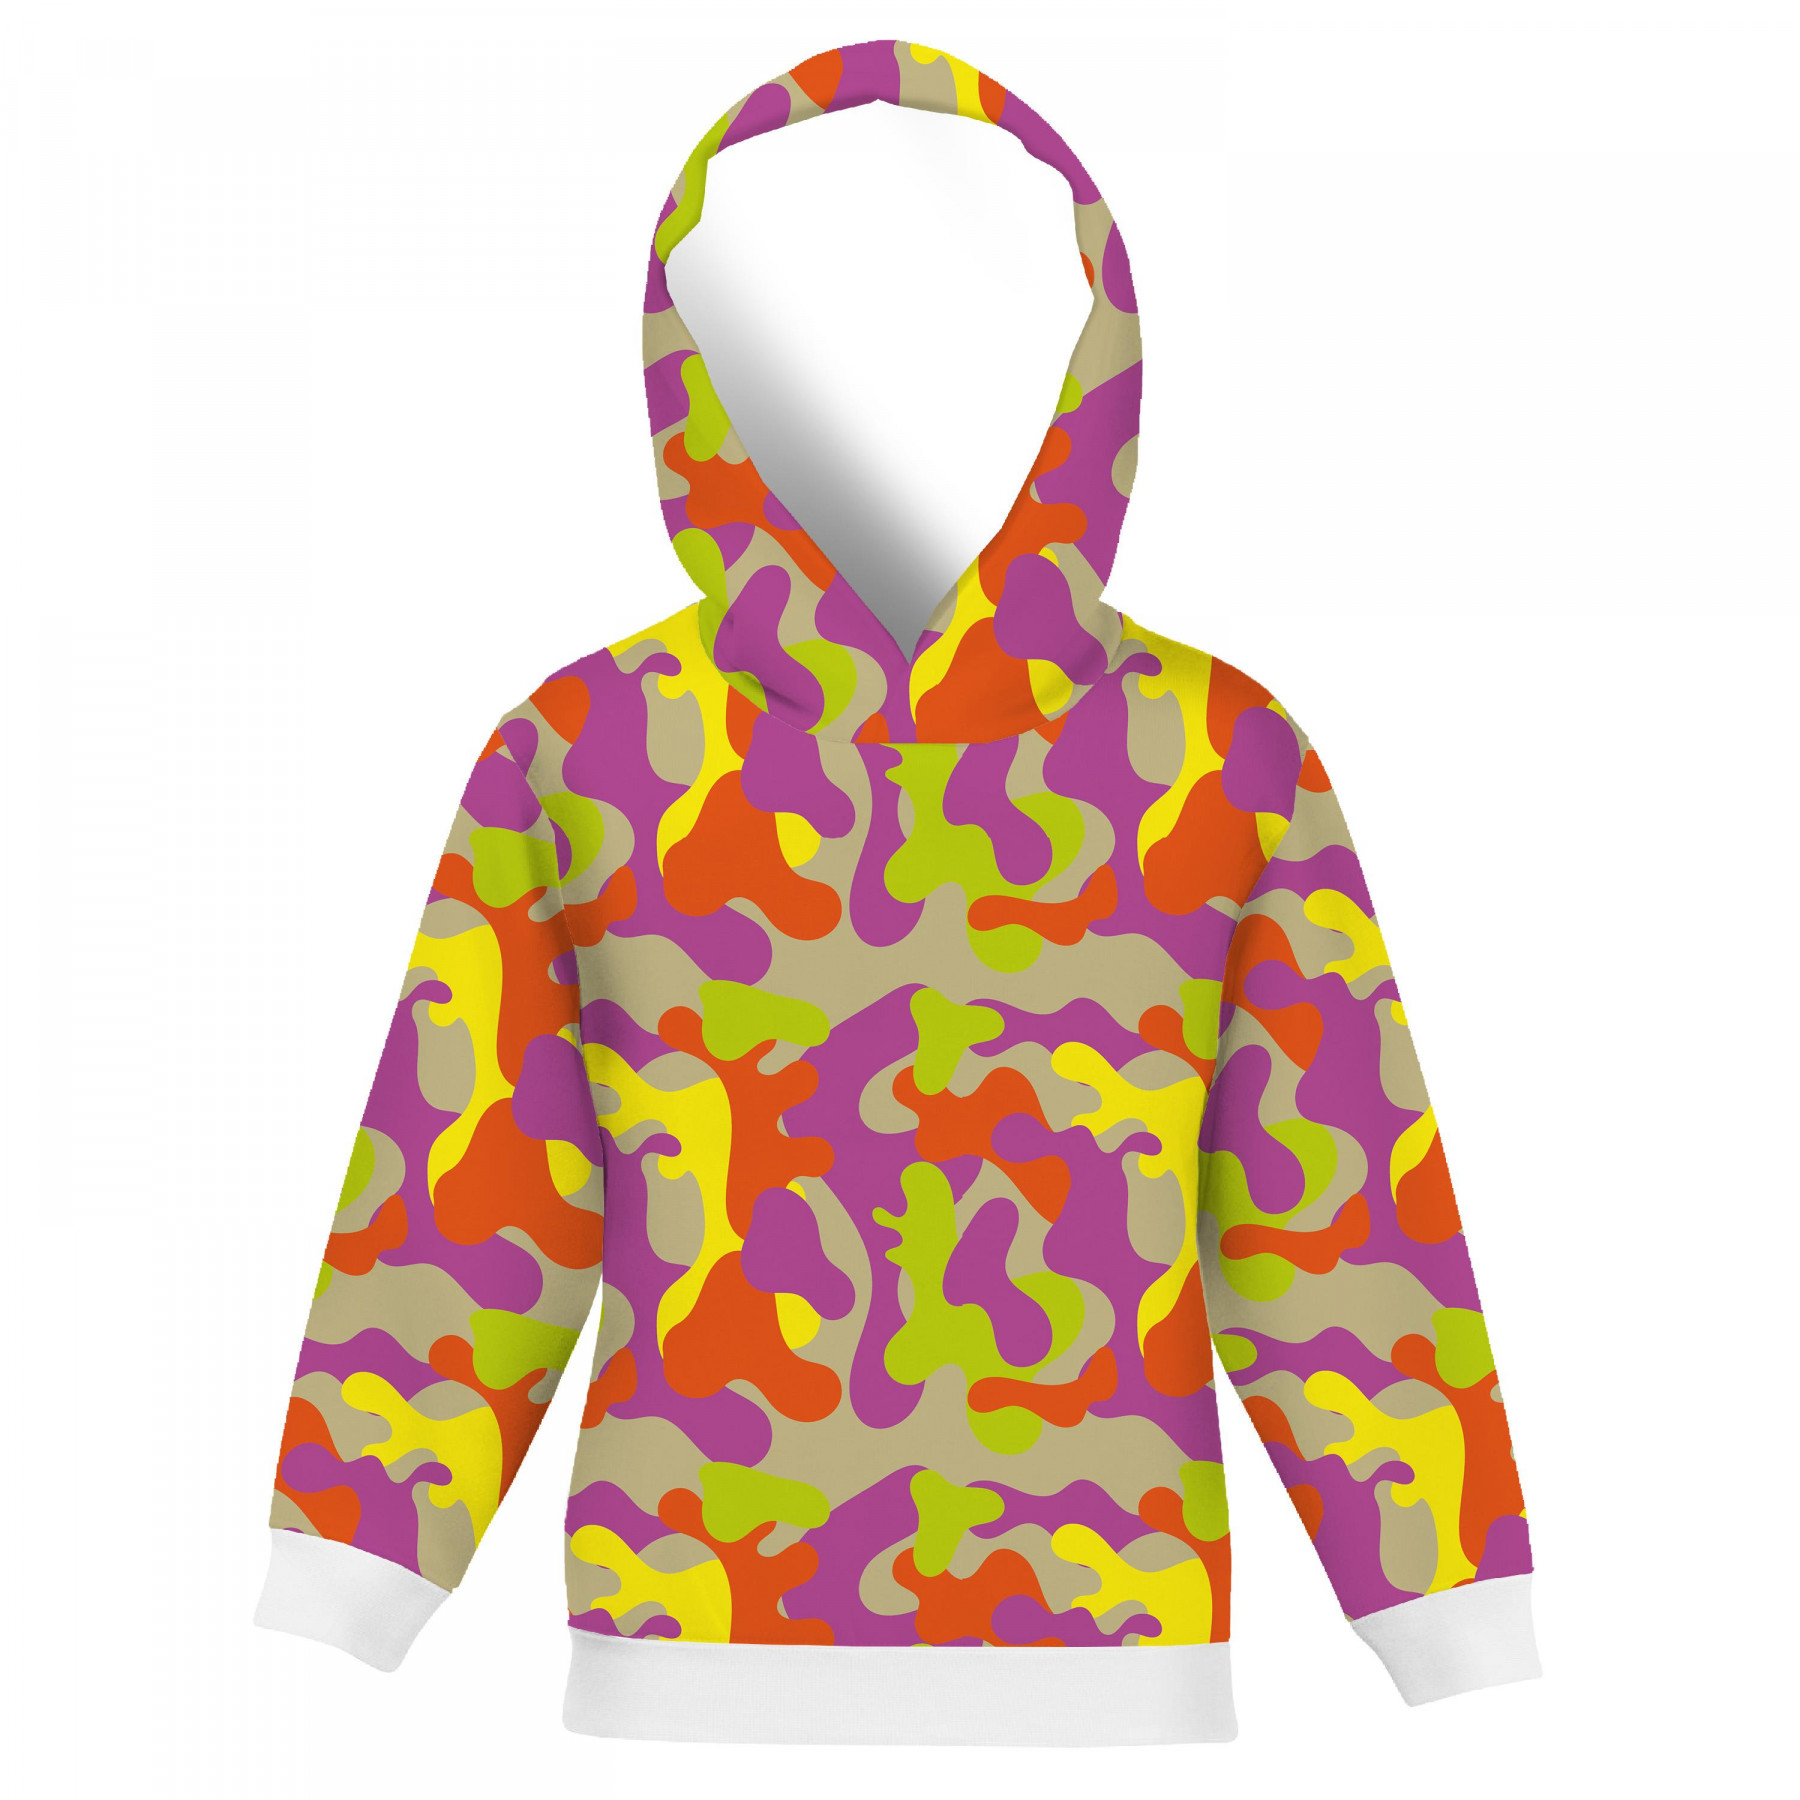 NEON CAMOUFLAGE PAT. 7